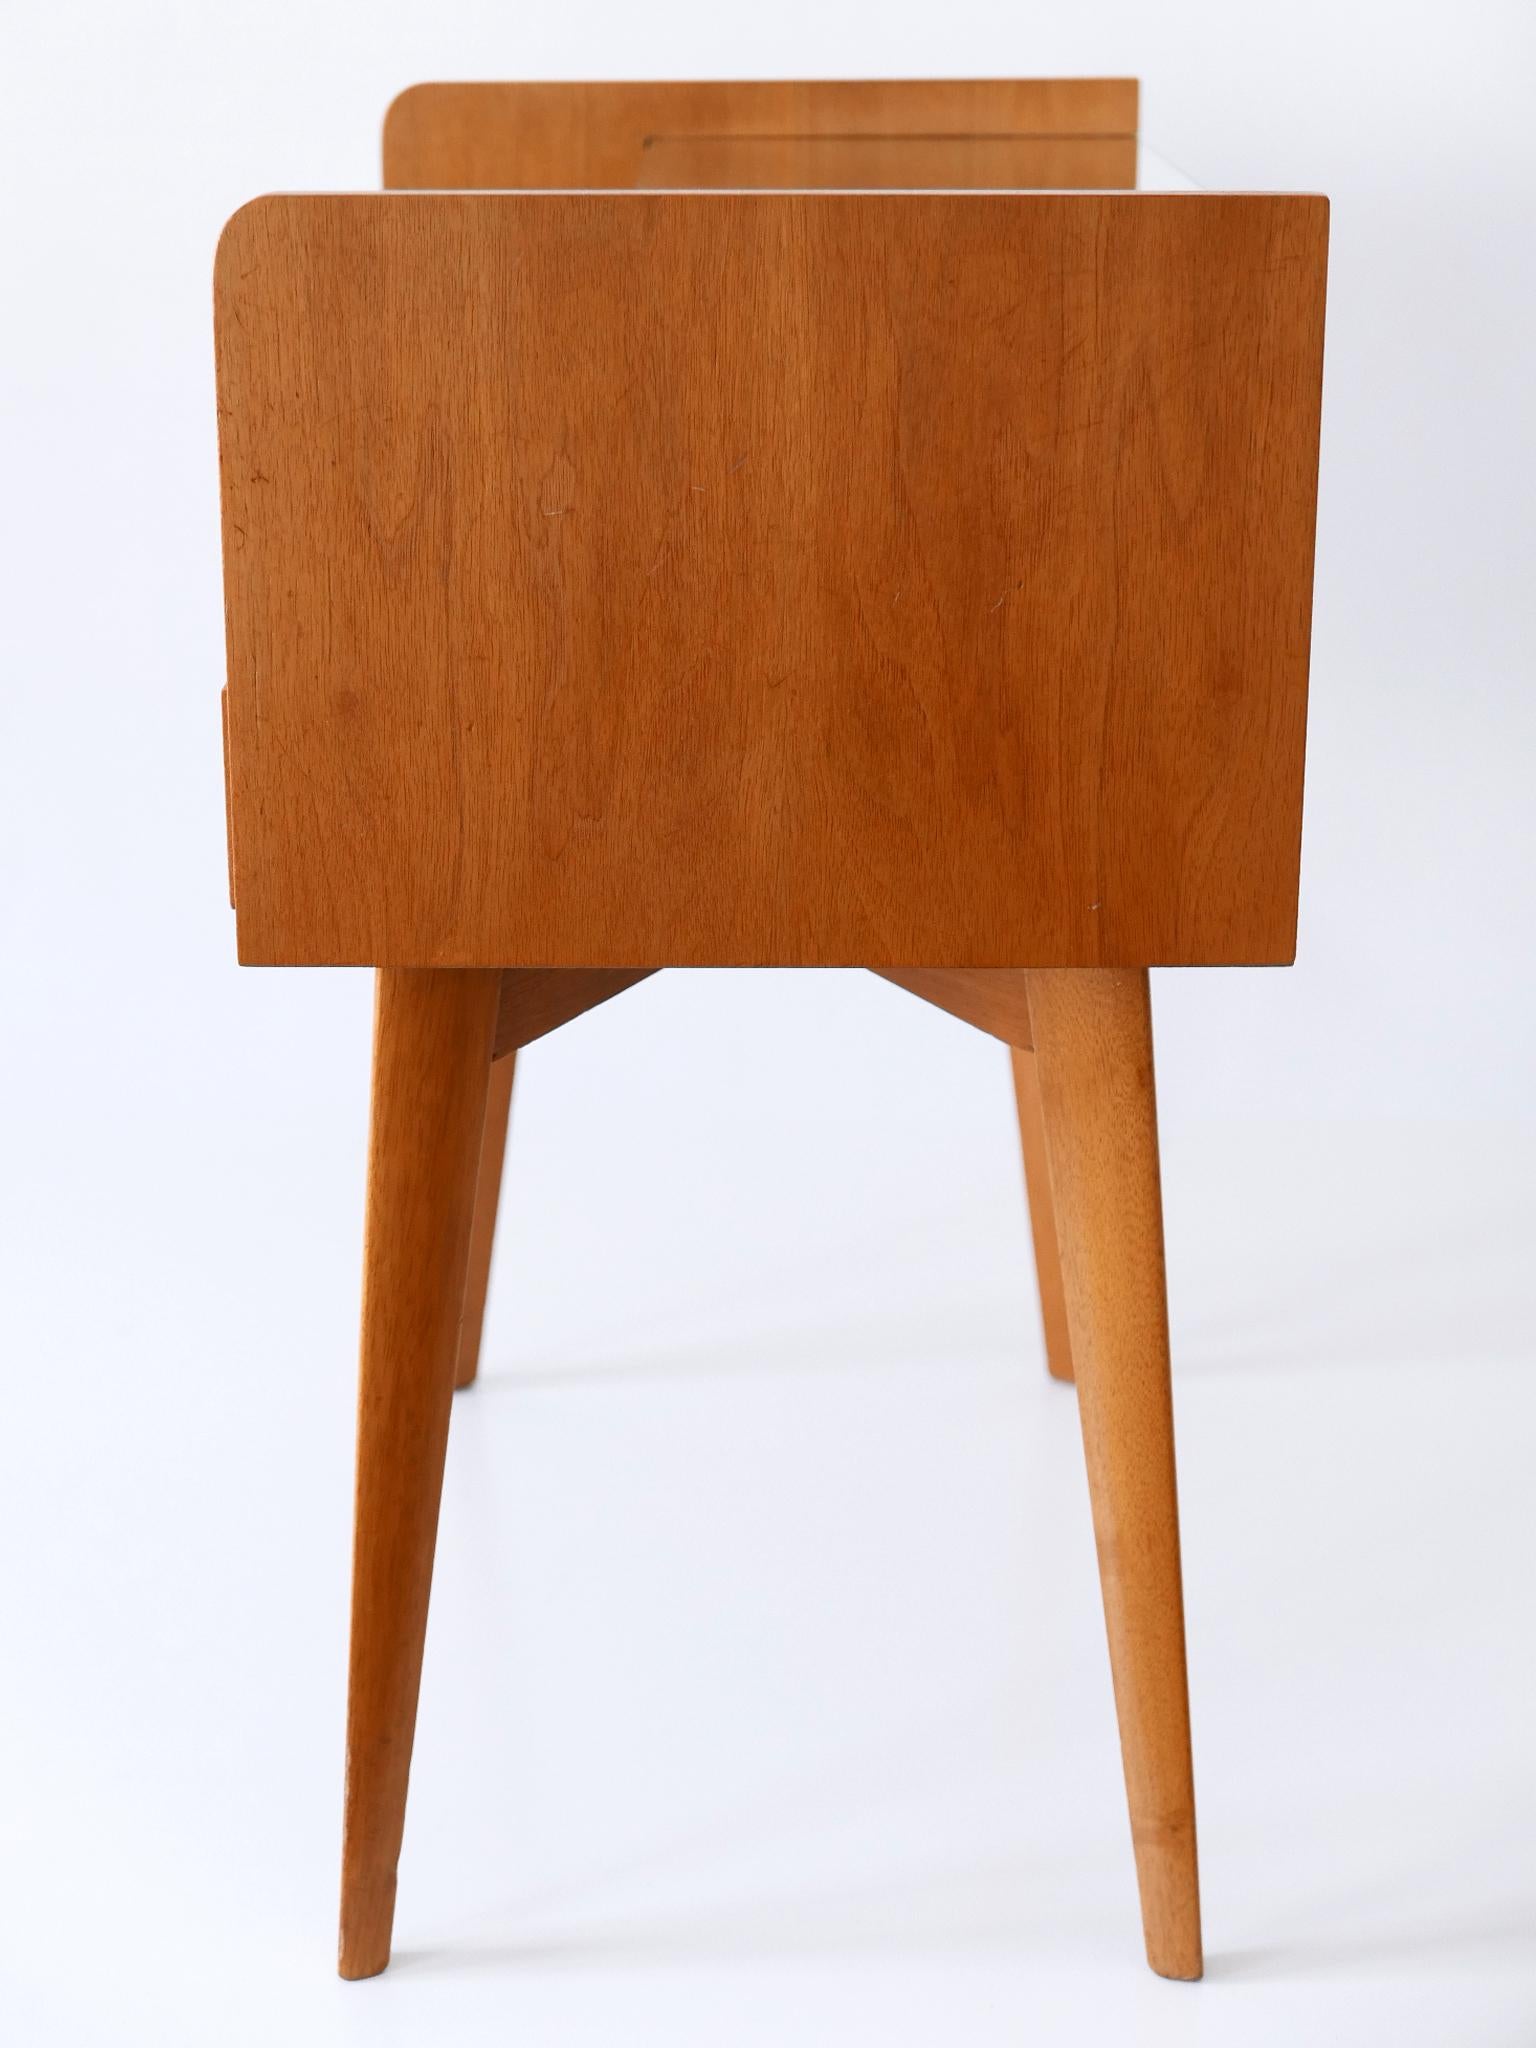 Set of Two Mid Century Modern Walnut Nightstands by WK Möbel Germany 1950s For Sale 9